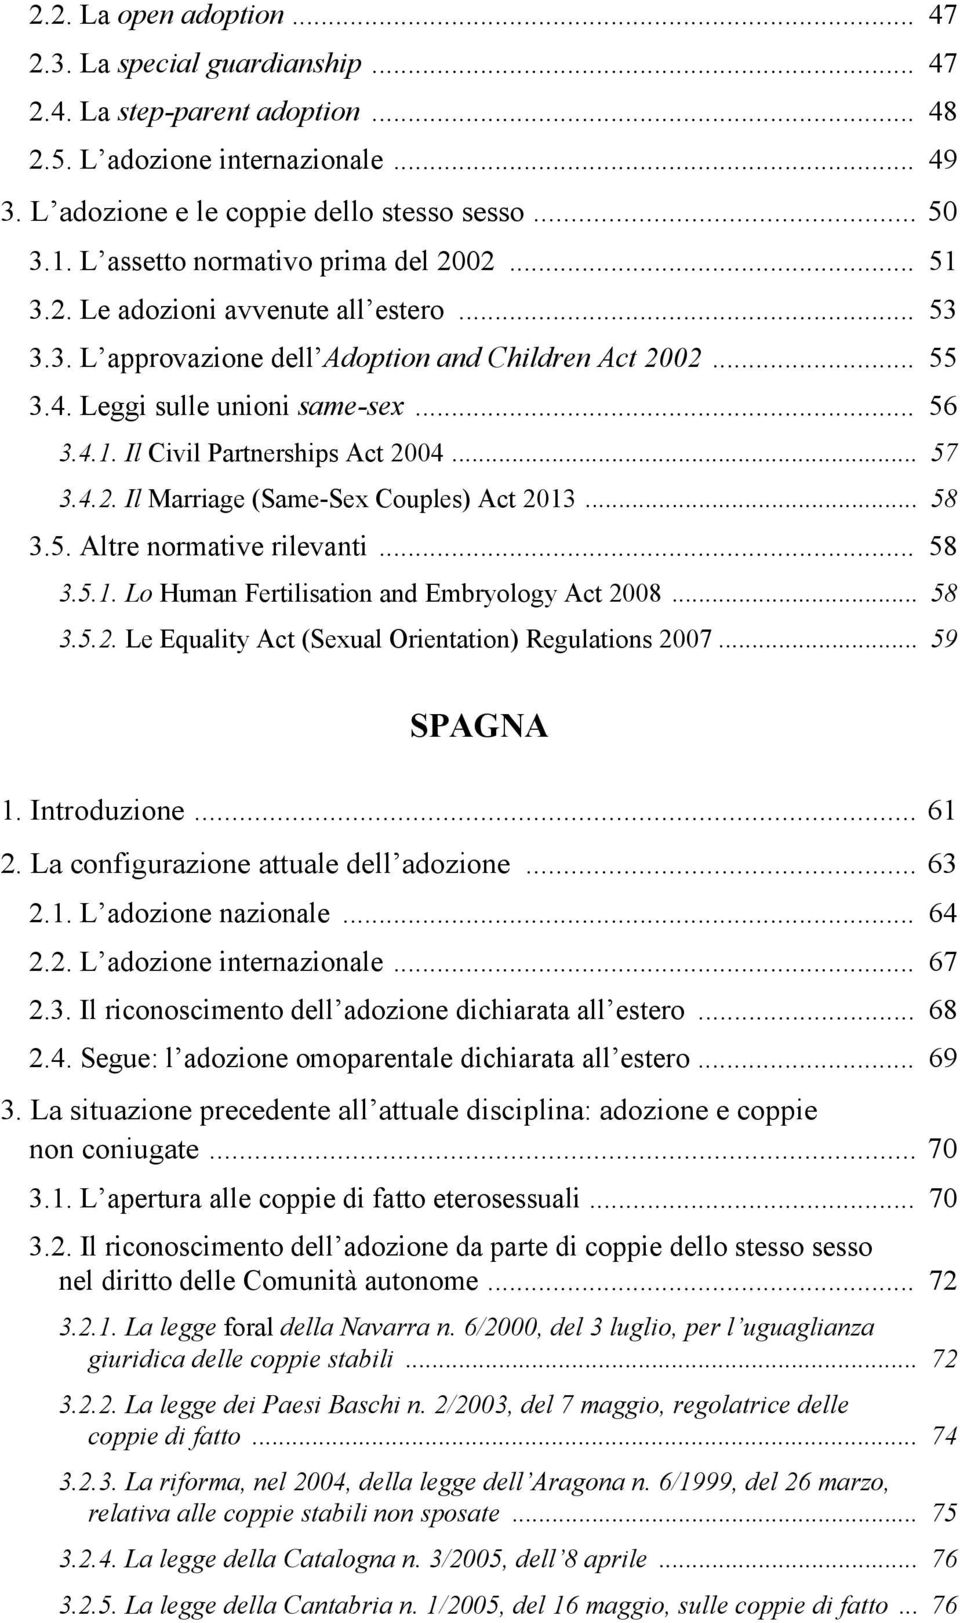 .. 57 3.4.2. Il Marriage (Same-Sex Couples) Act 2013... 58 3.5. Altre normative rilevanti... 58 3.5.1. Lo Human Fertilisation and Embryology Act 2008... 58 3.5.2. Le Equality Act (Sexual Orientation) Regulations 2007.